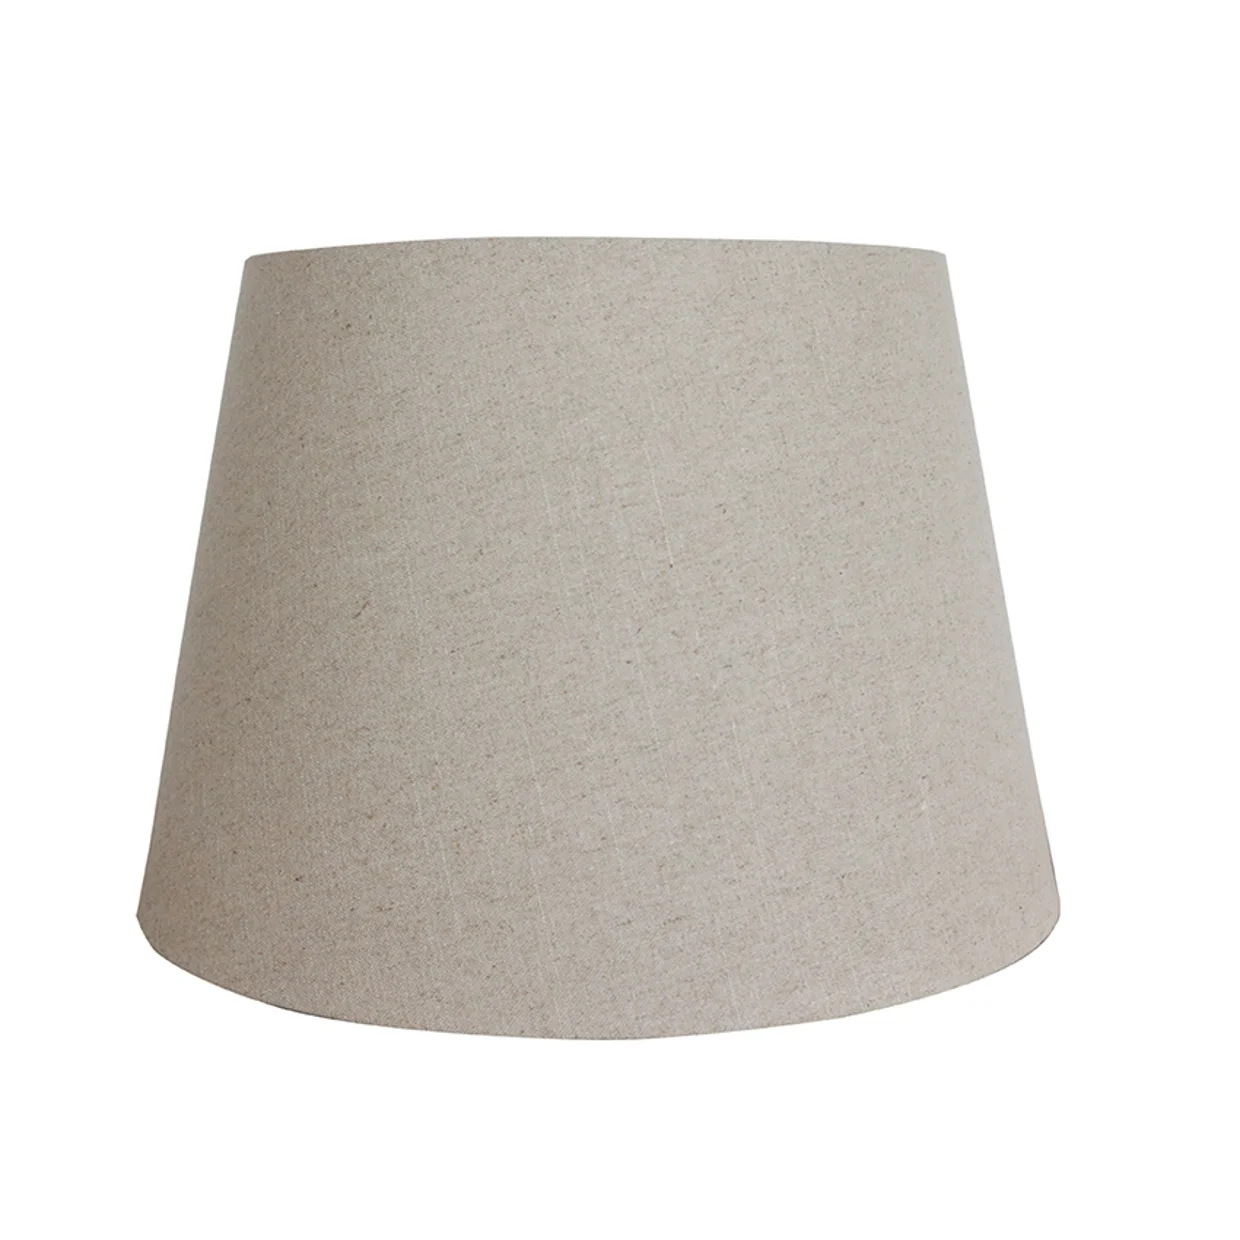 Raw Linen Tall Drum Lampshade